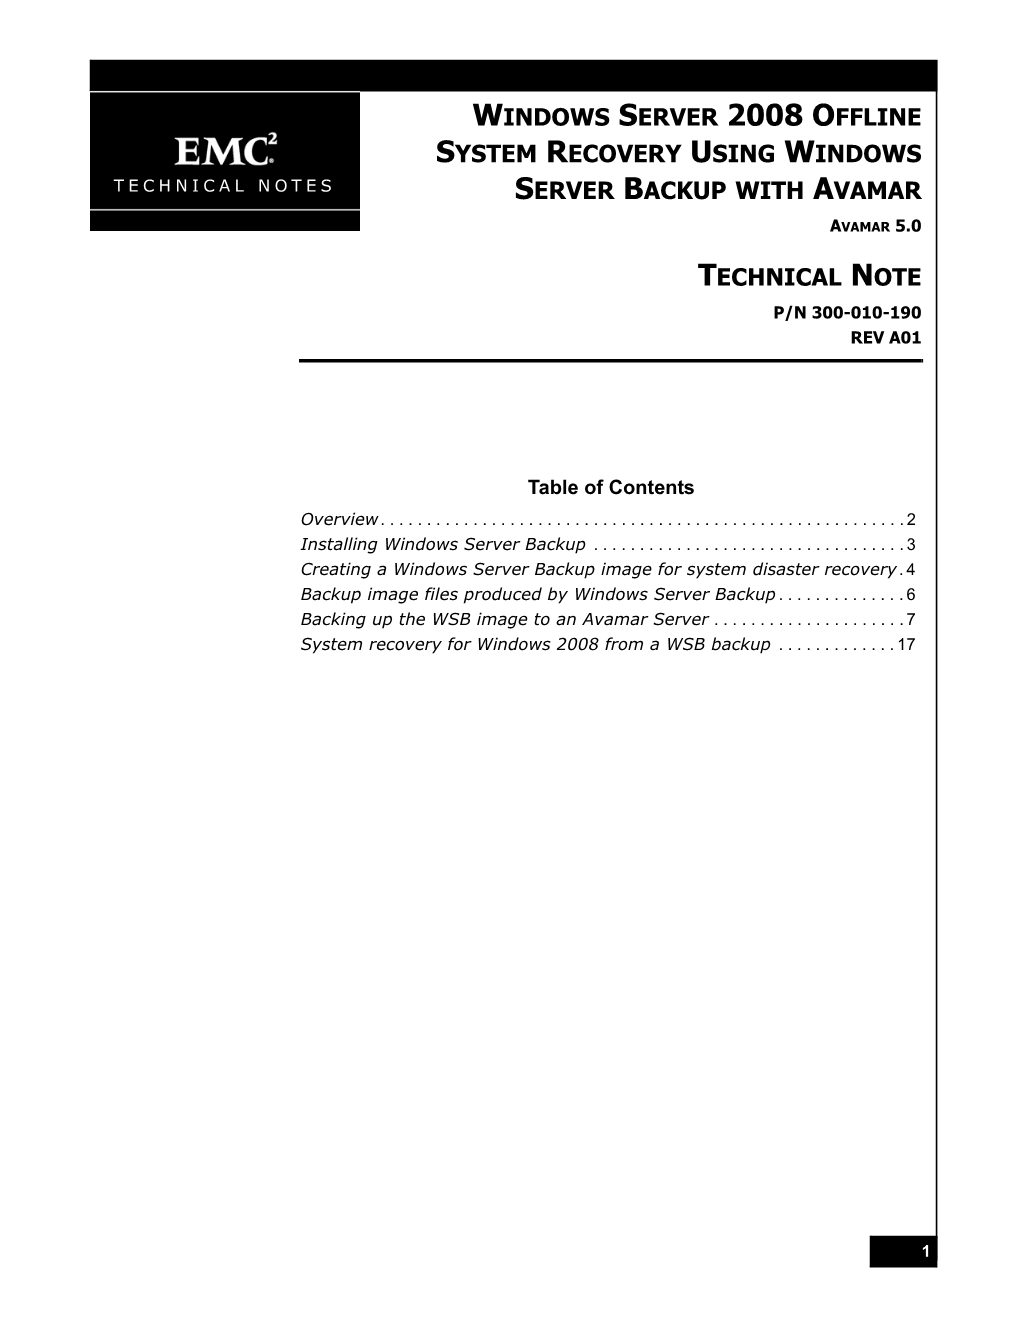 Windows Server 2008 Offline System Recovery Using Windows Technical Notes Server Backup with Avamar